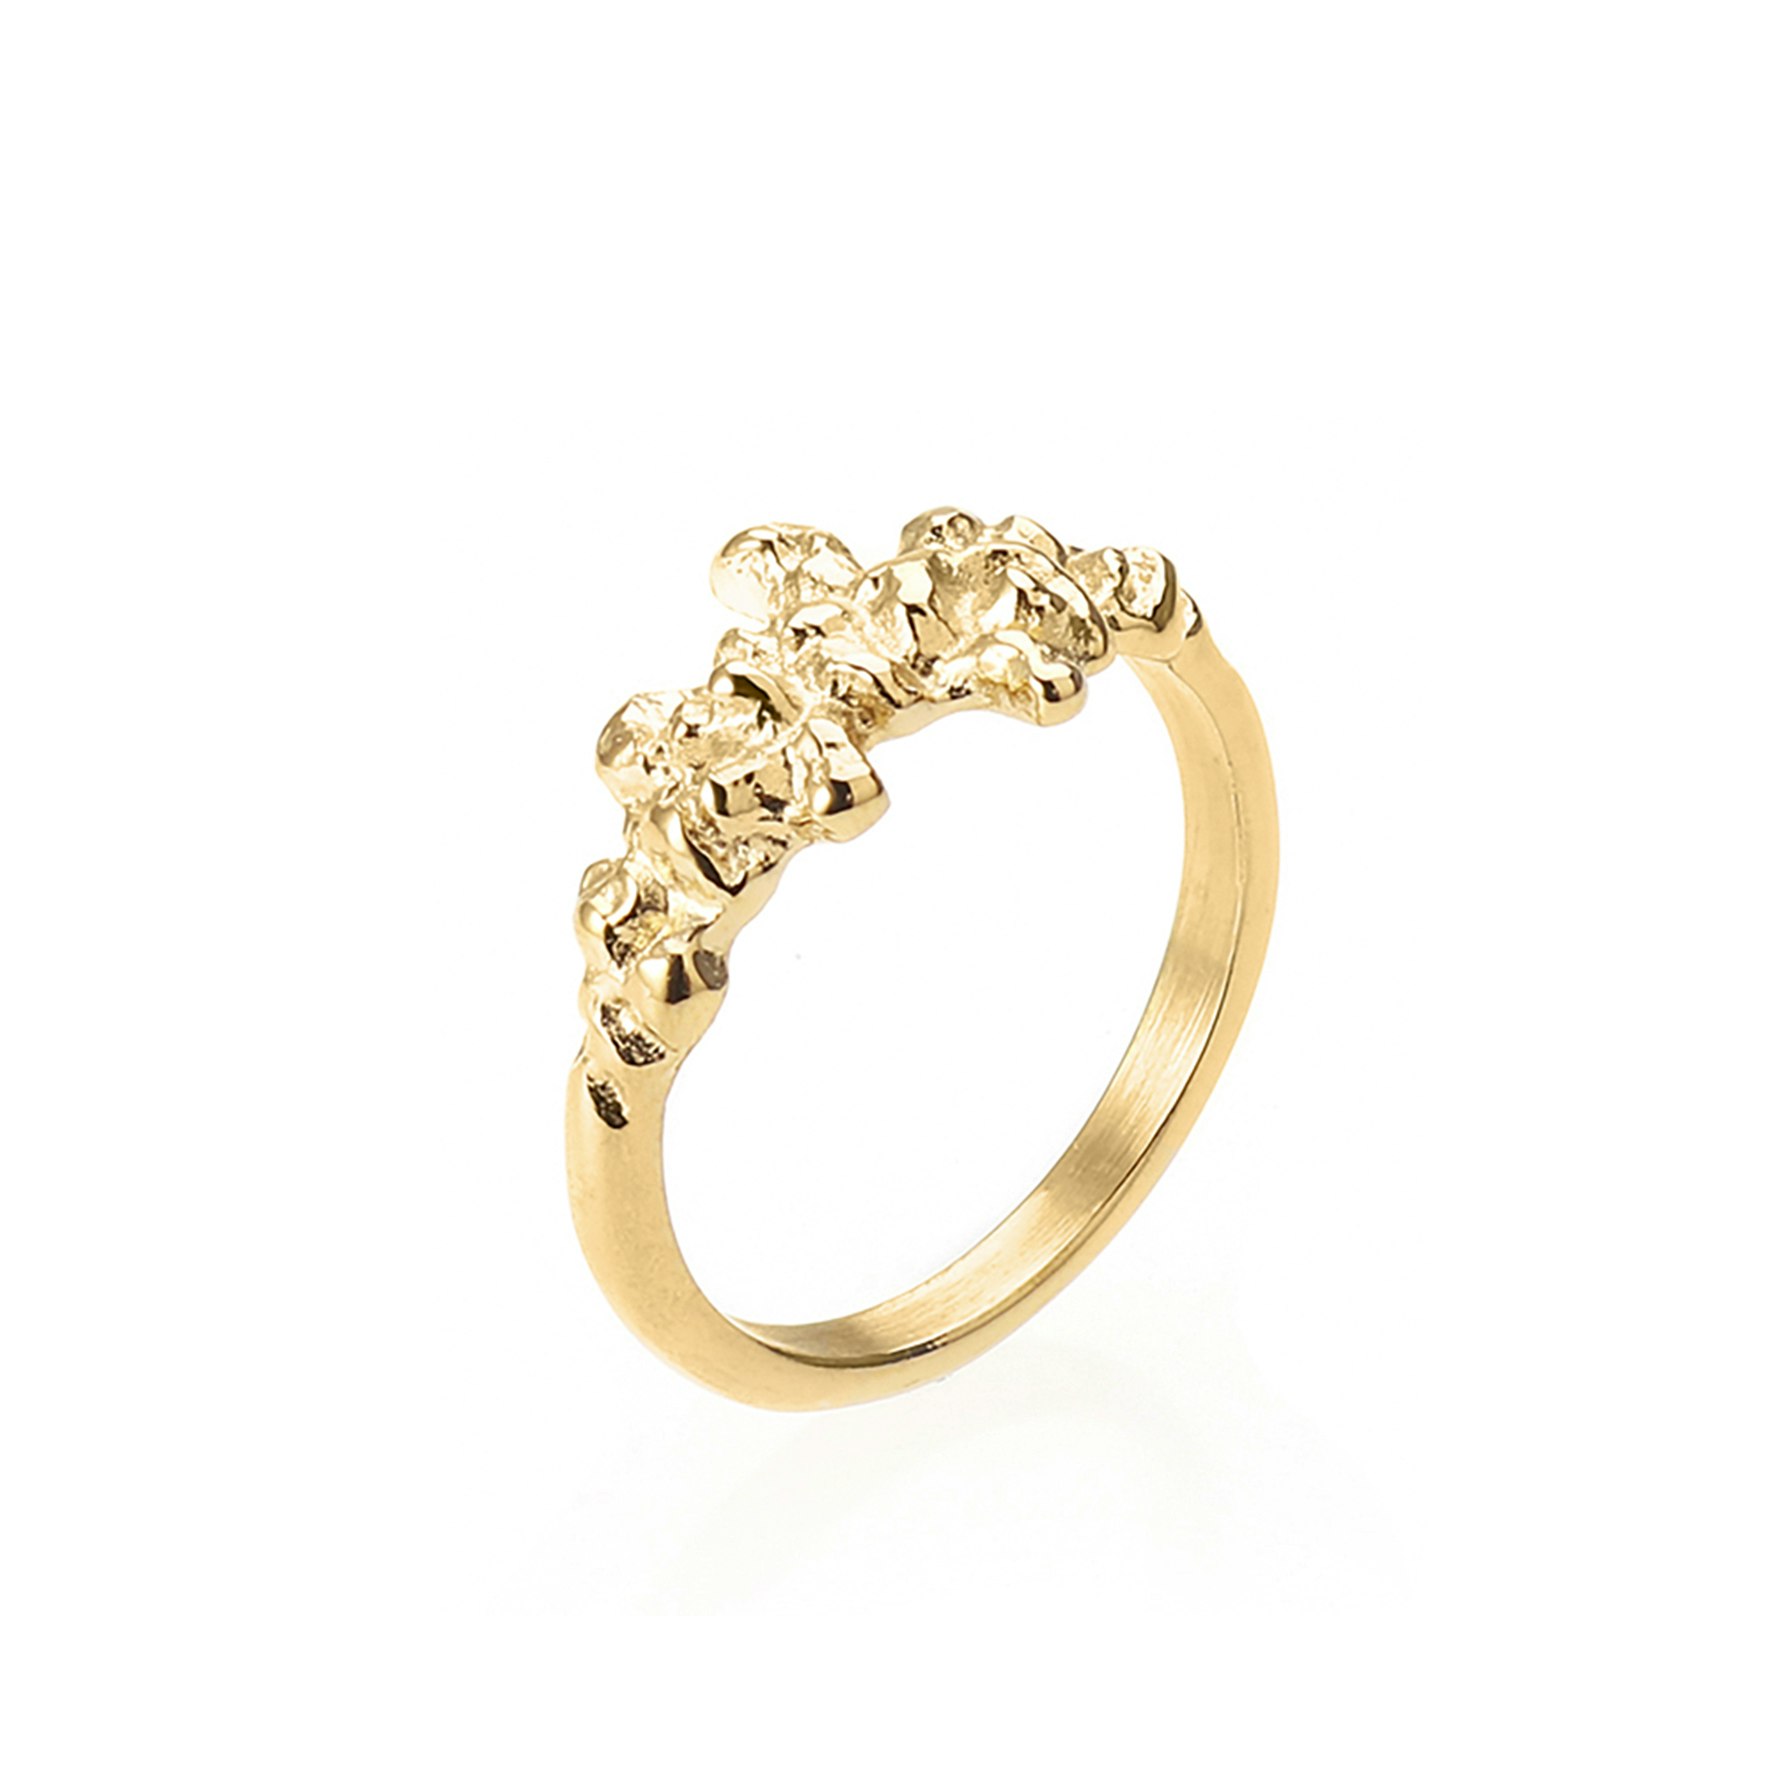 Xenia x Sistie 2nd Small Ring from Sistie 2nd in Goldplated stainless steel